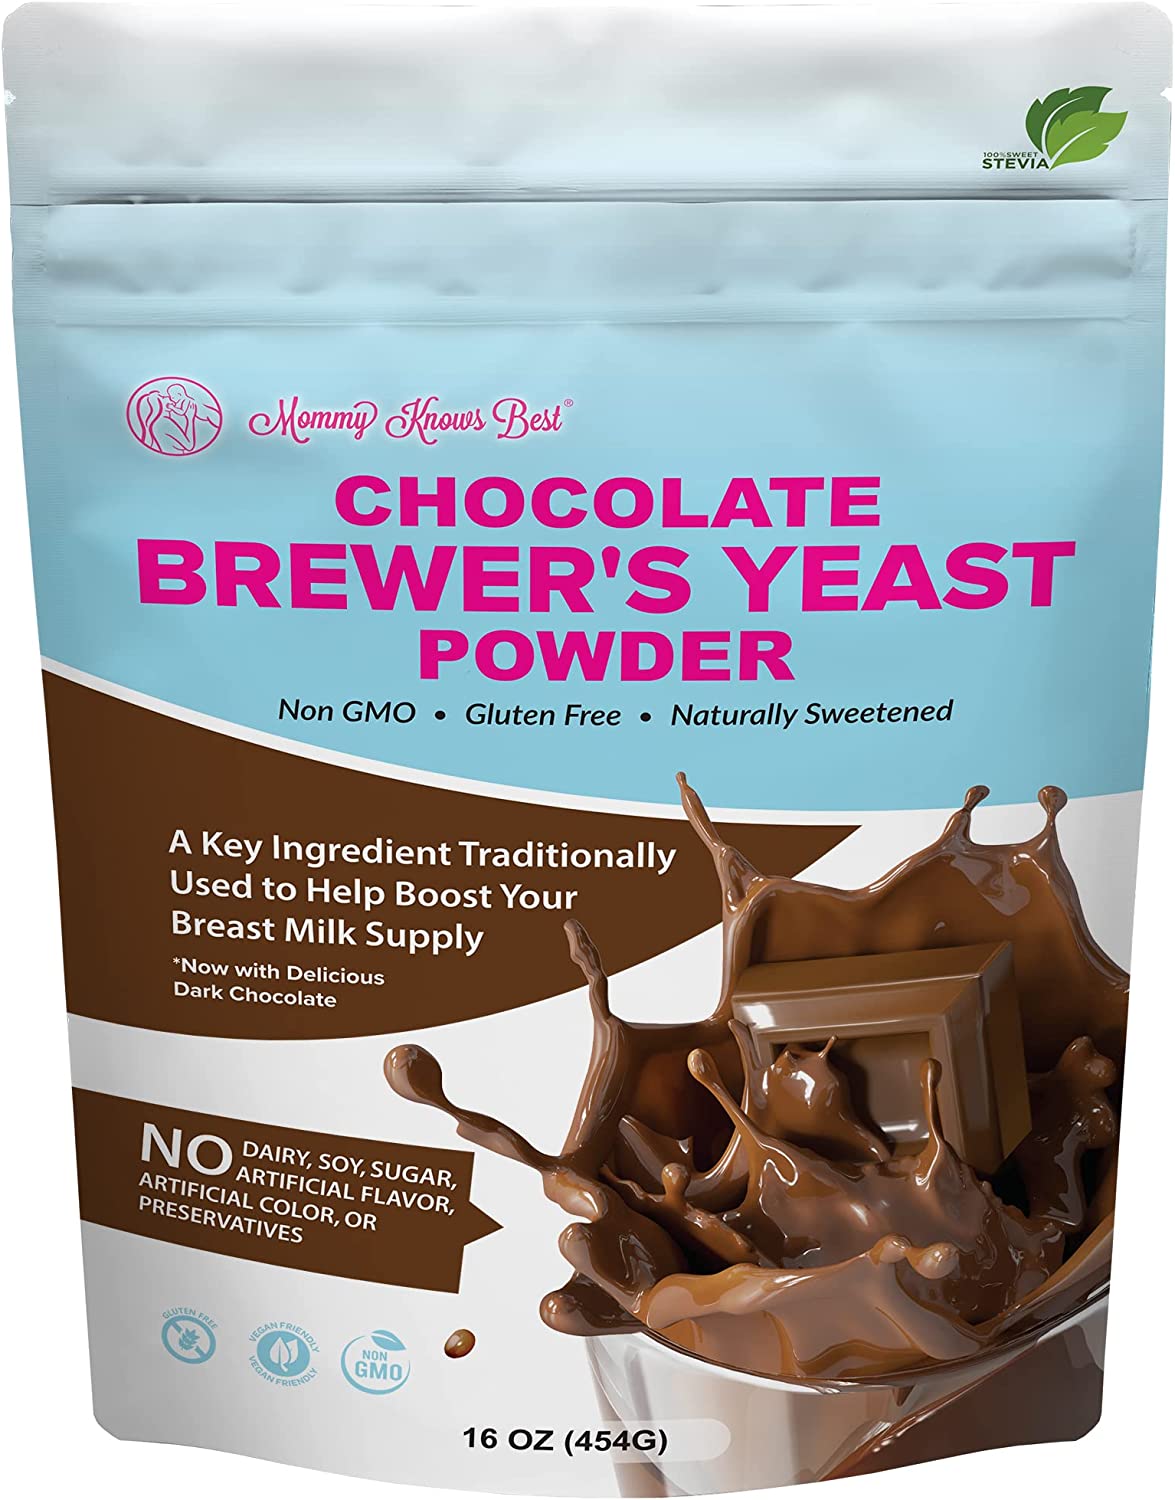 Brewers Yeast Powder for Lactation Cookies for Breastfeeding – Lactation Supplement for Increased Breast Milk – Nutritional Yeast for Lactation Support – Breastmilk Supplement for Women – Easy to Bake